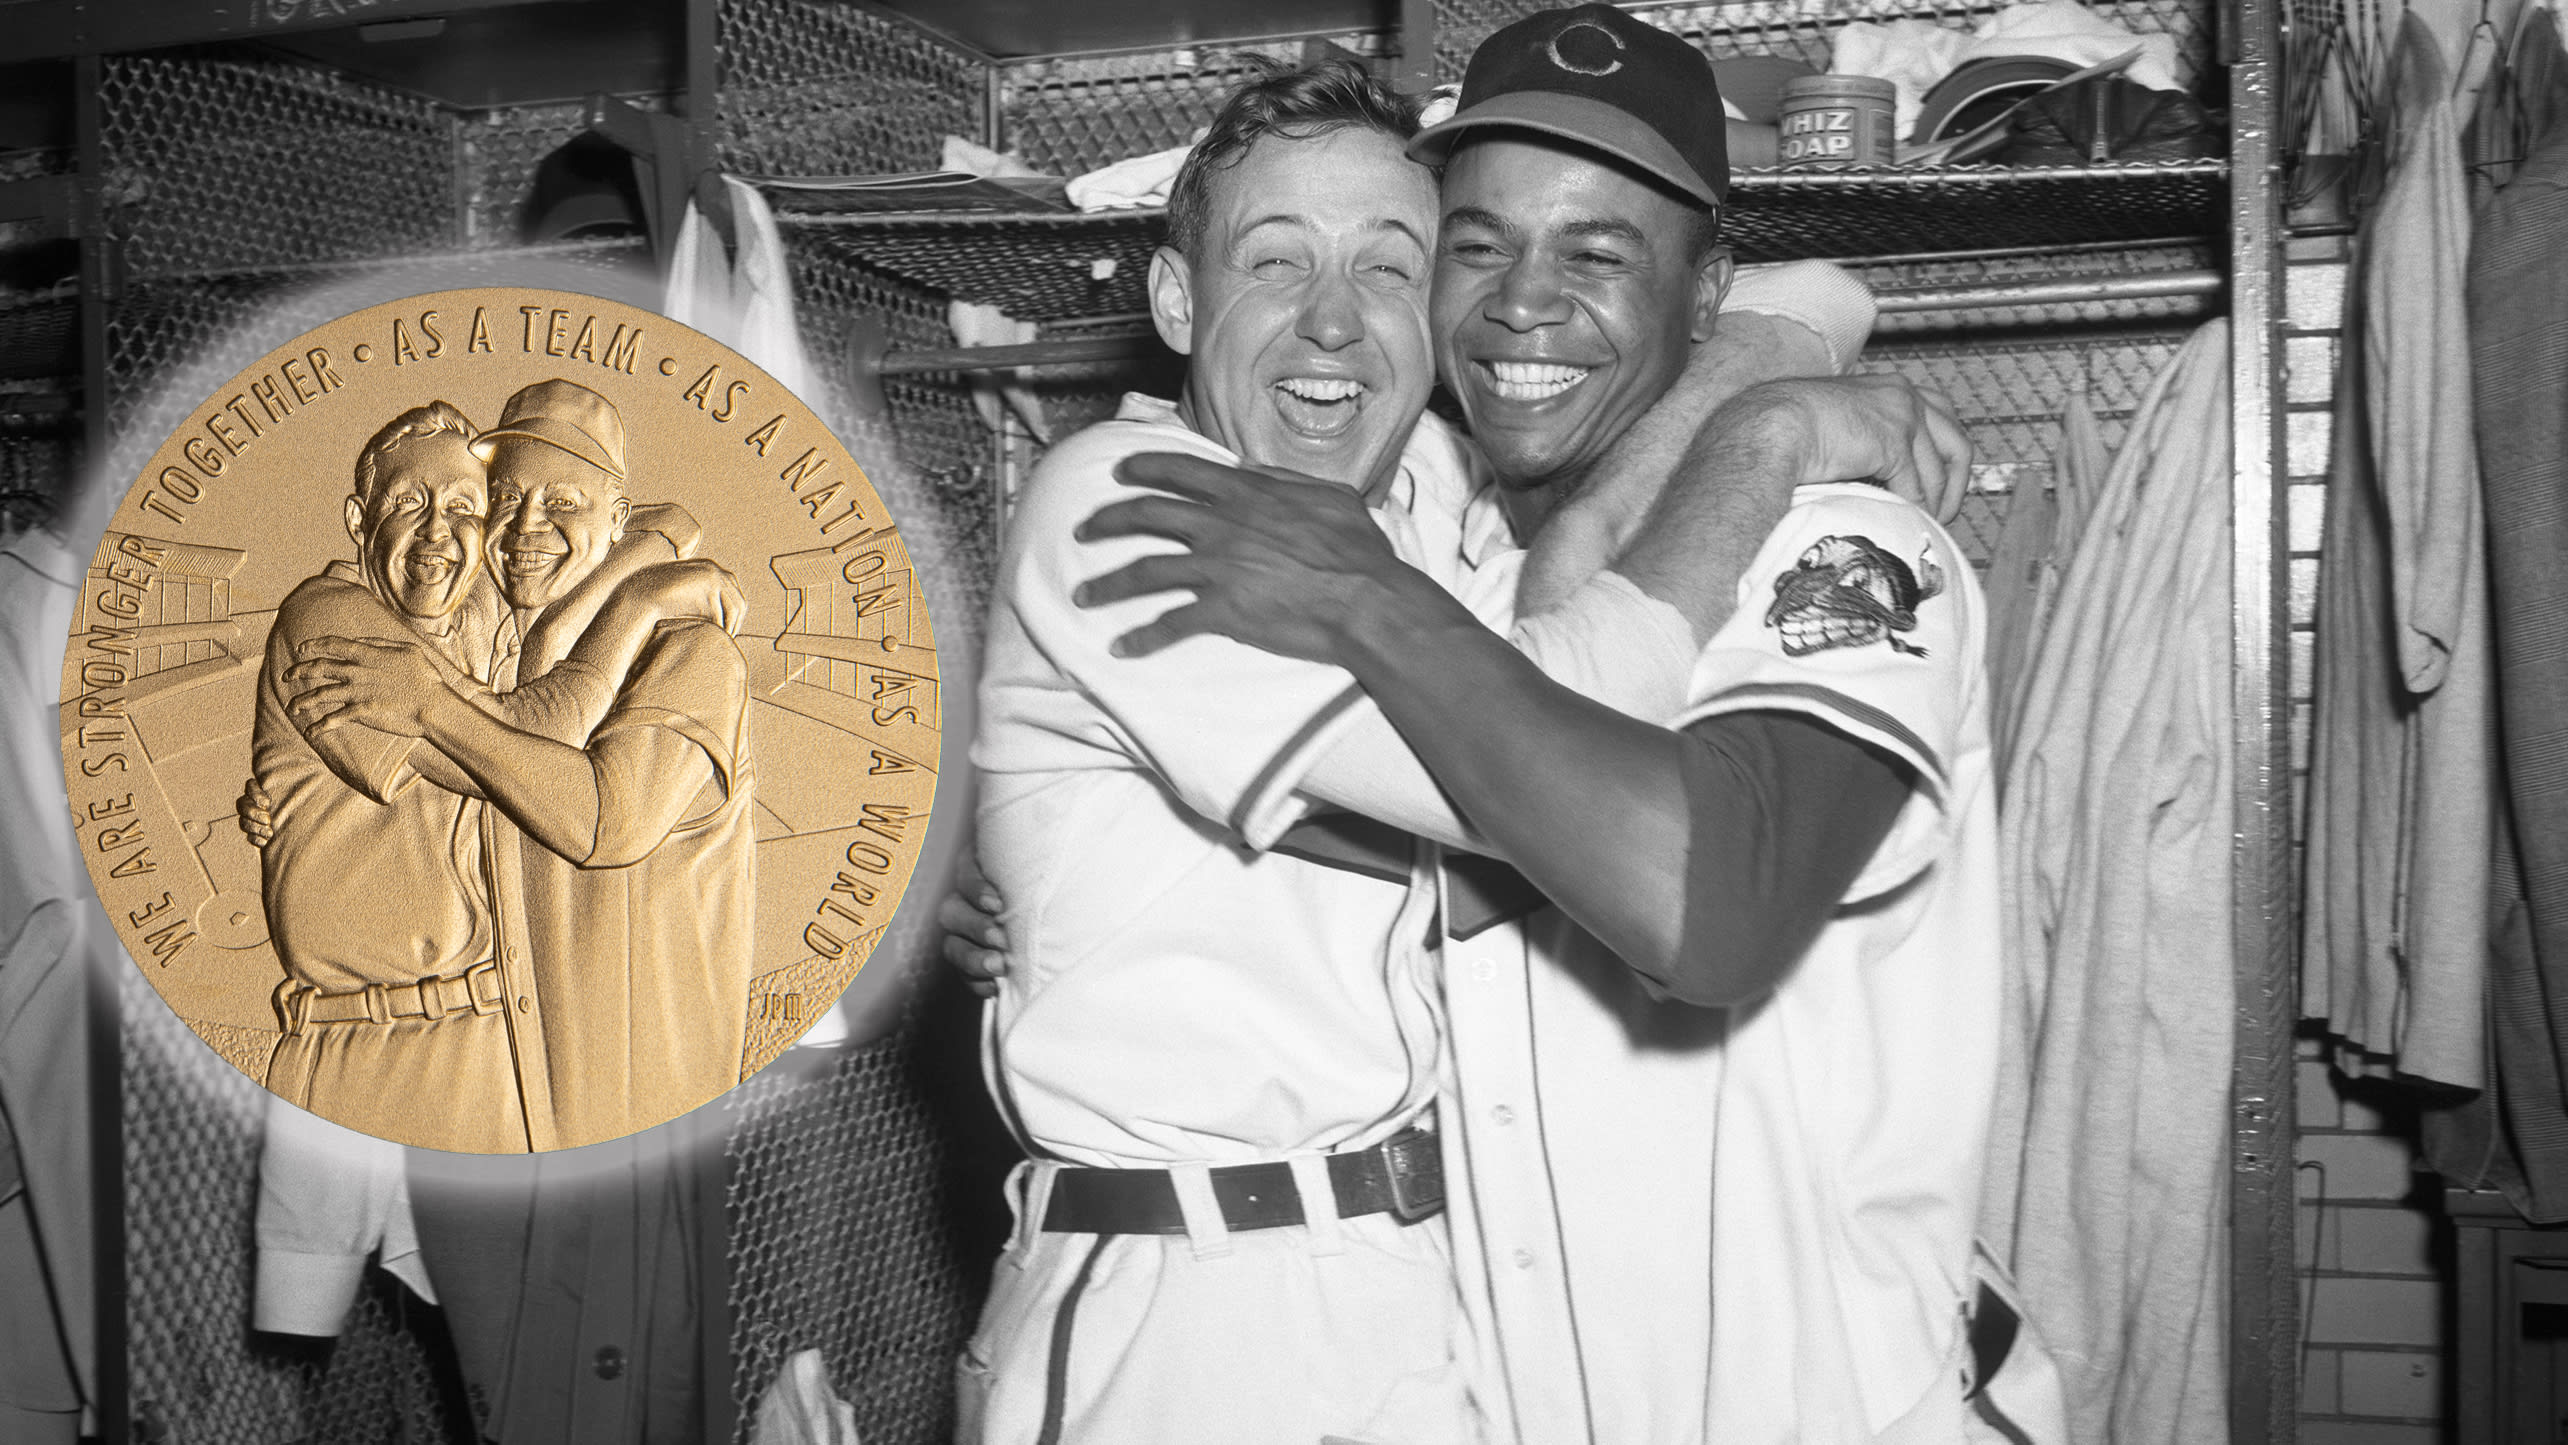 One side of Larry Doby's Congressional Gold Medal depicts a famous photo